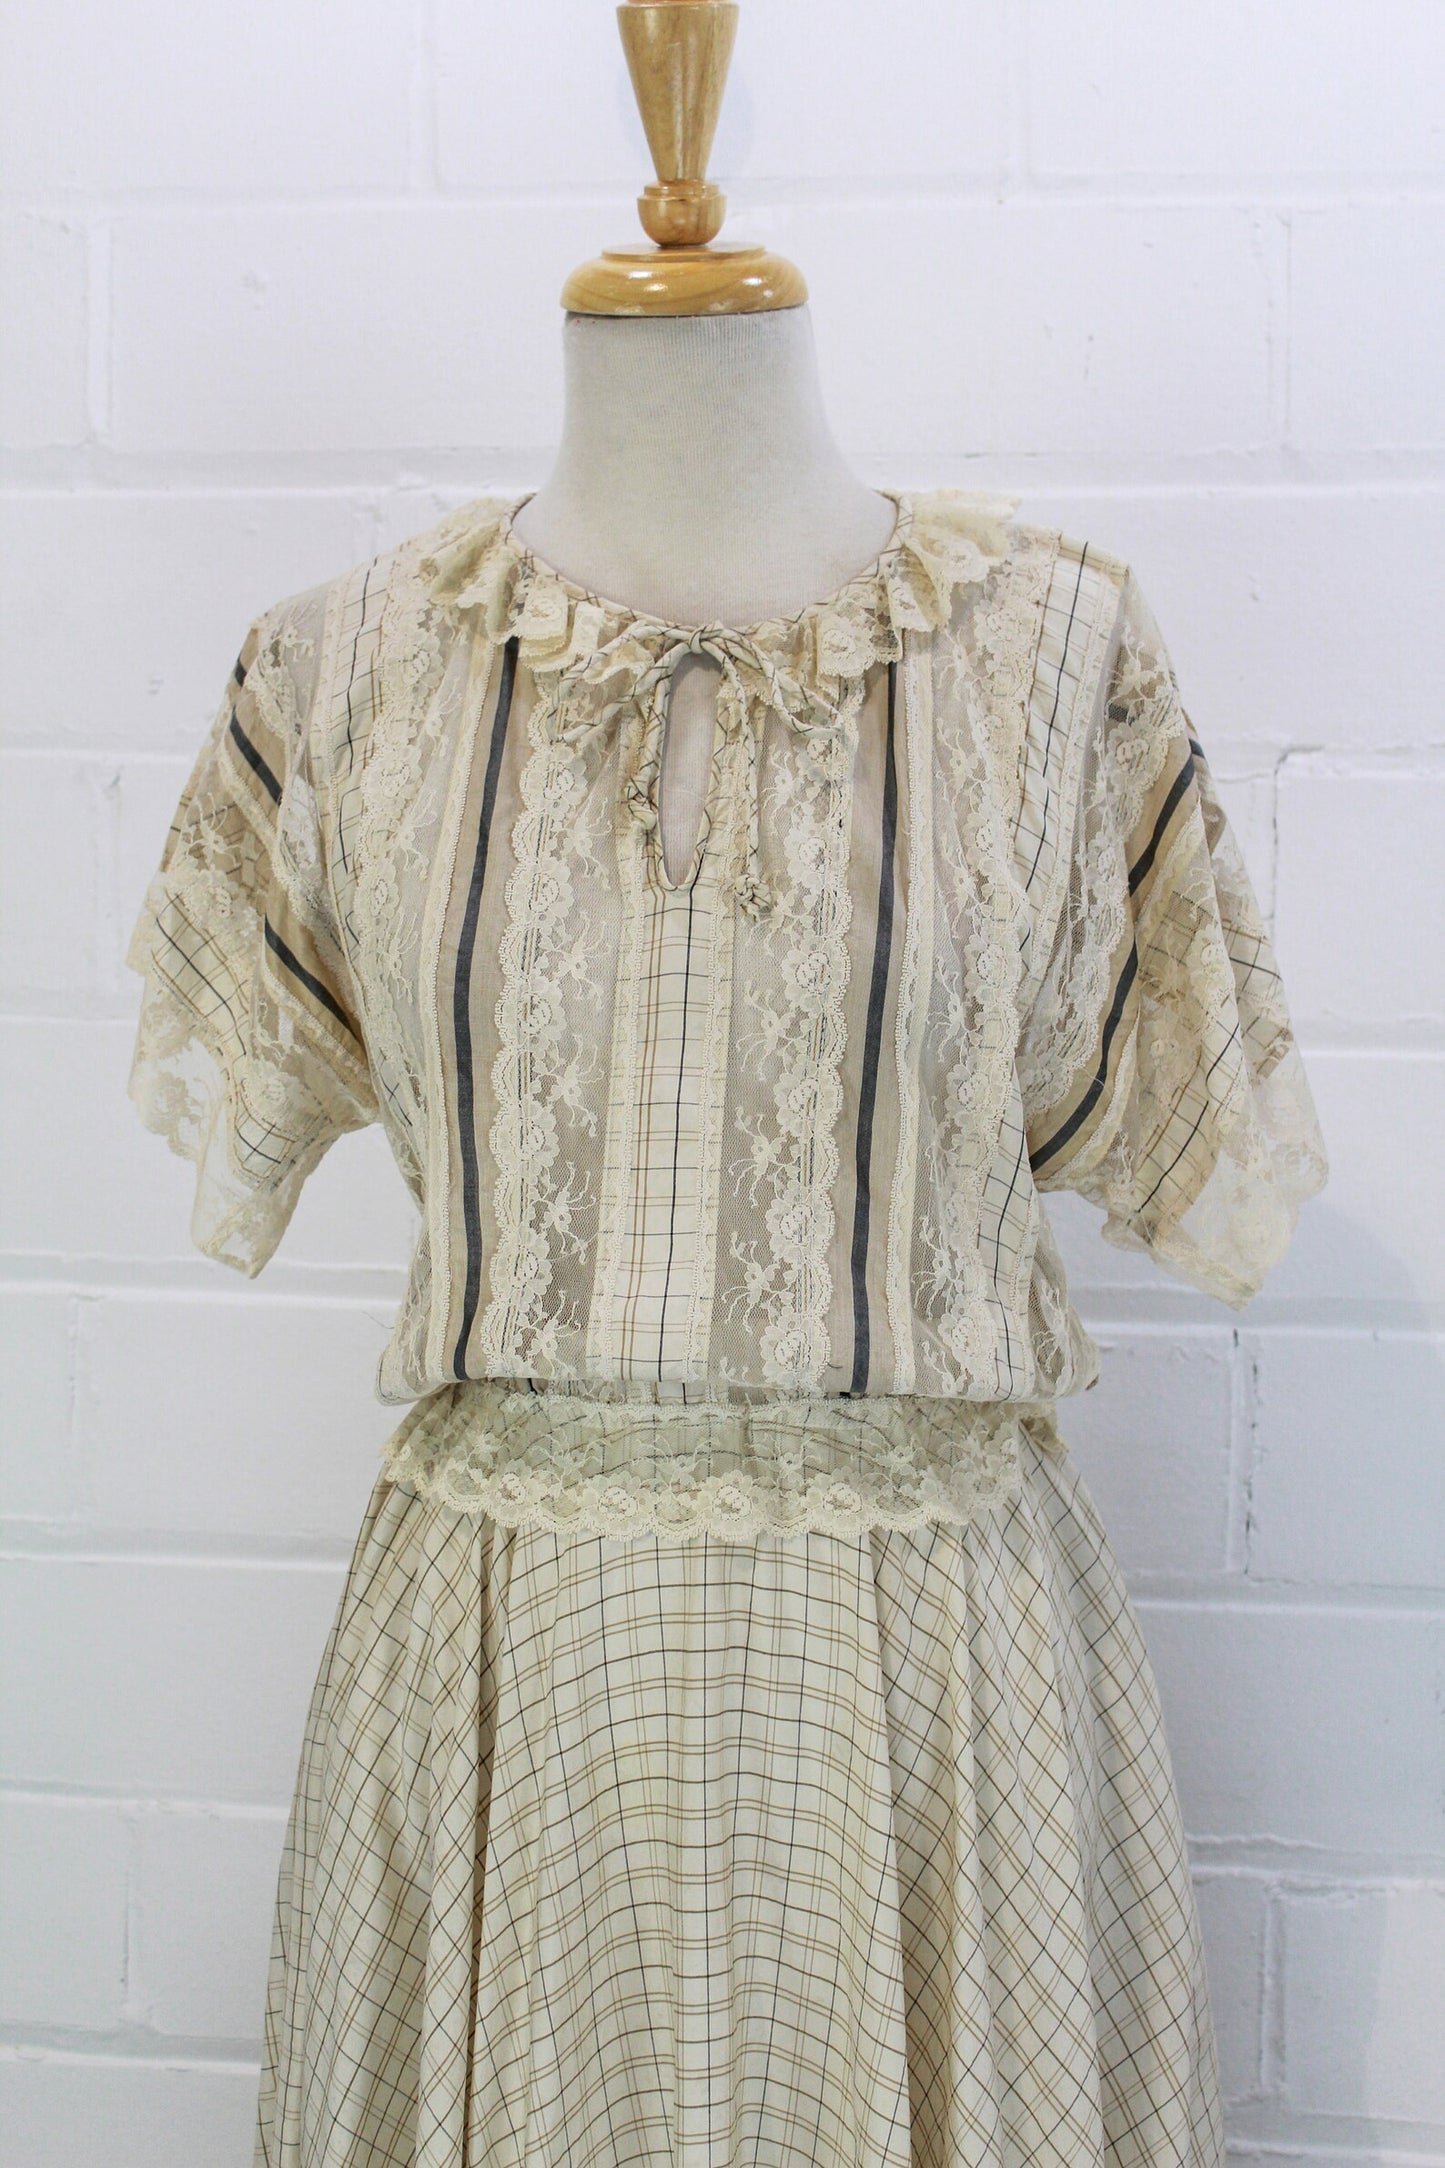 Vintage 1970s Koos Van den Akker Silk and Lace Dress with Window Pane Print, Ruffle Detail, Size Small, Bust 34"